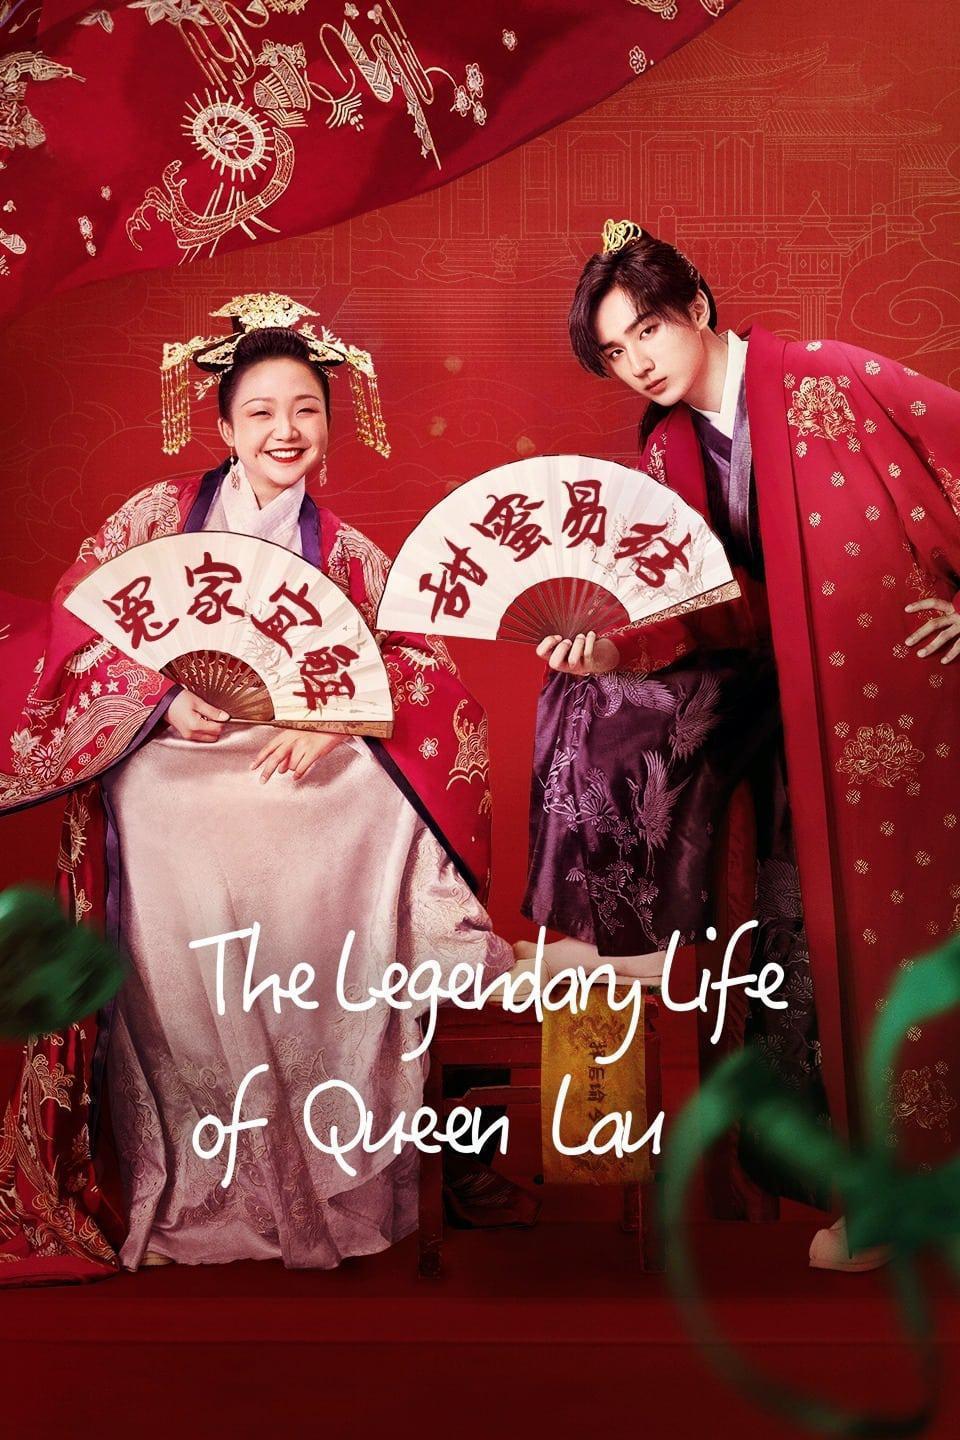 TV ratings for The Legendary Life Of Queen Lau (我叫刘金凤) in the United Kingdom. Youku TV series